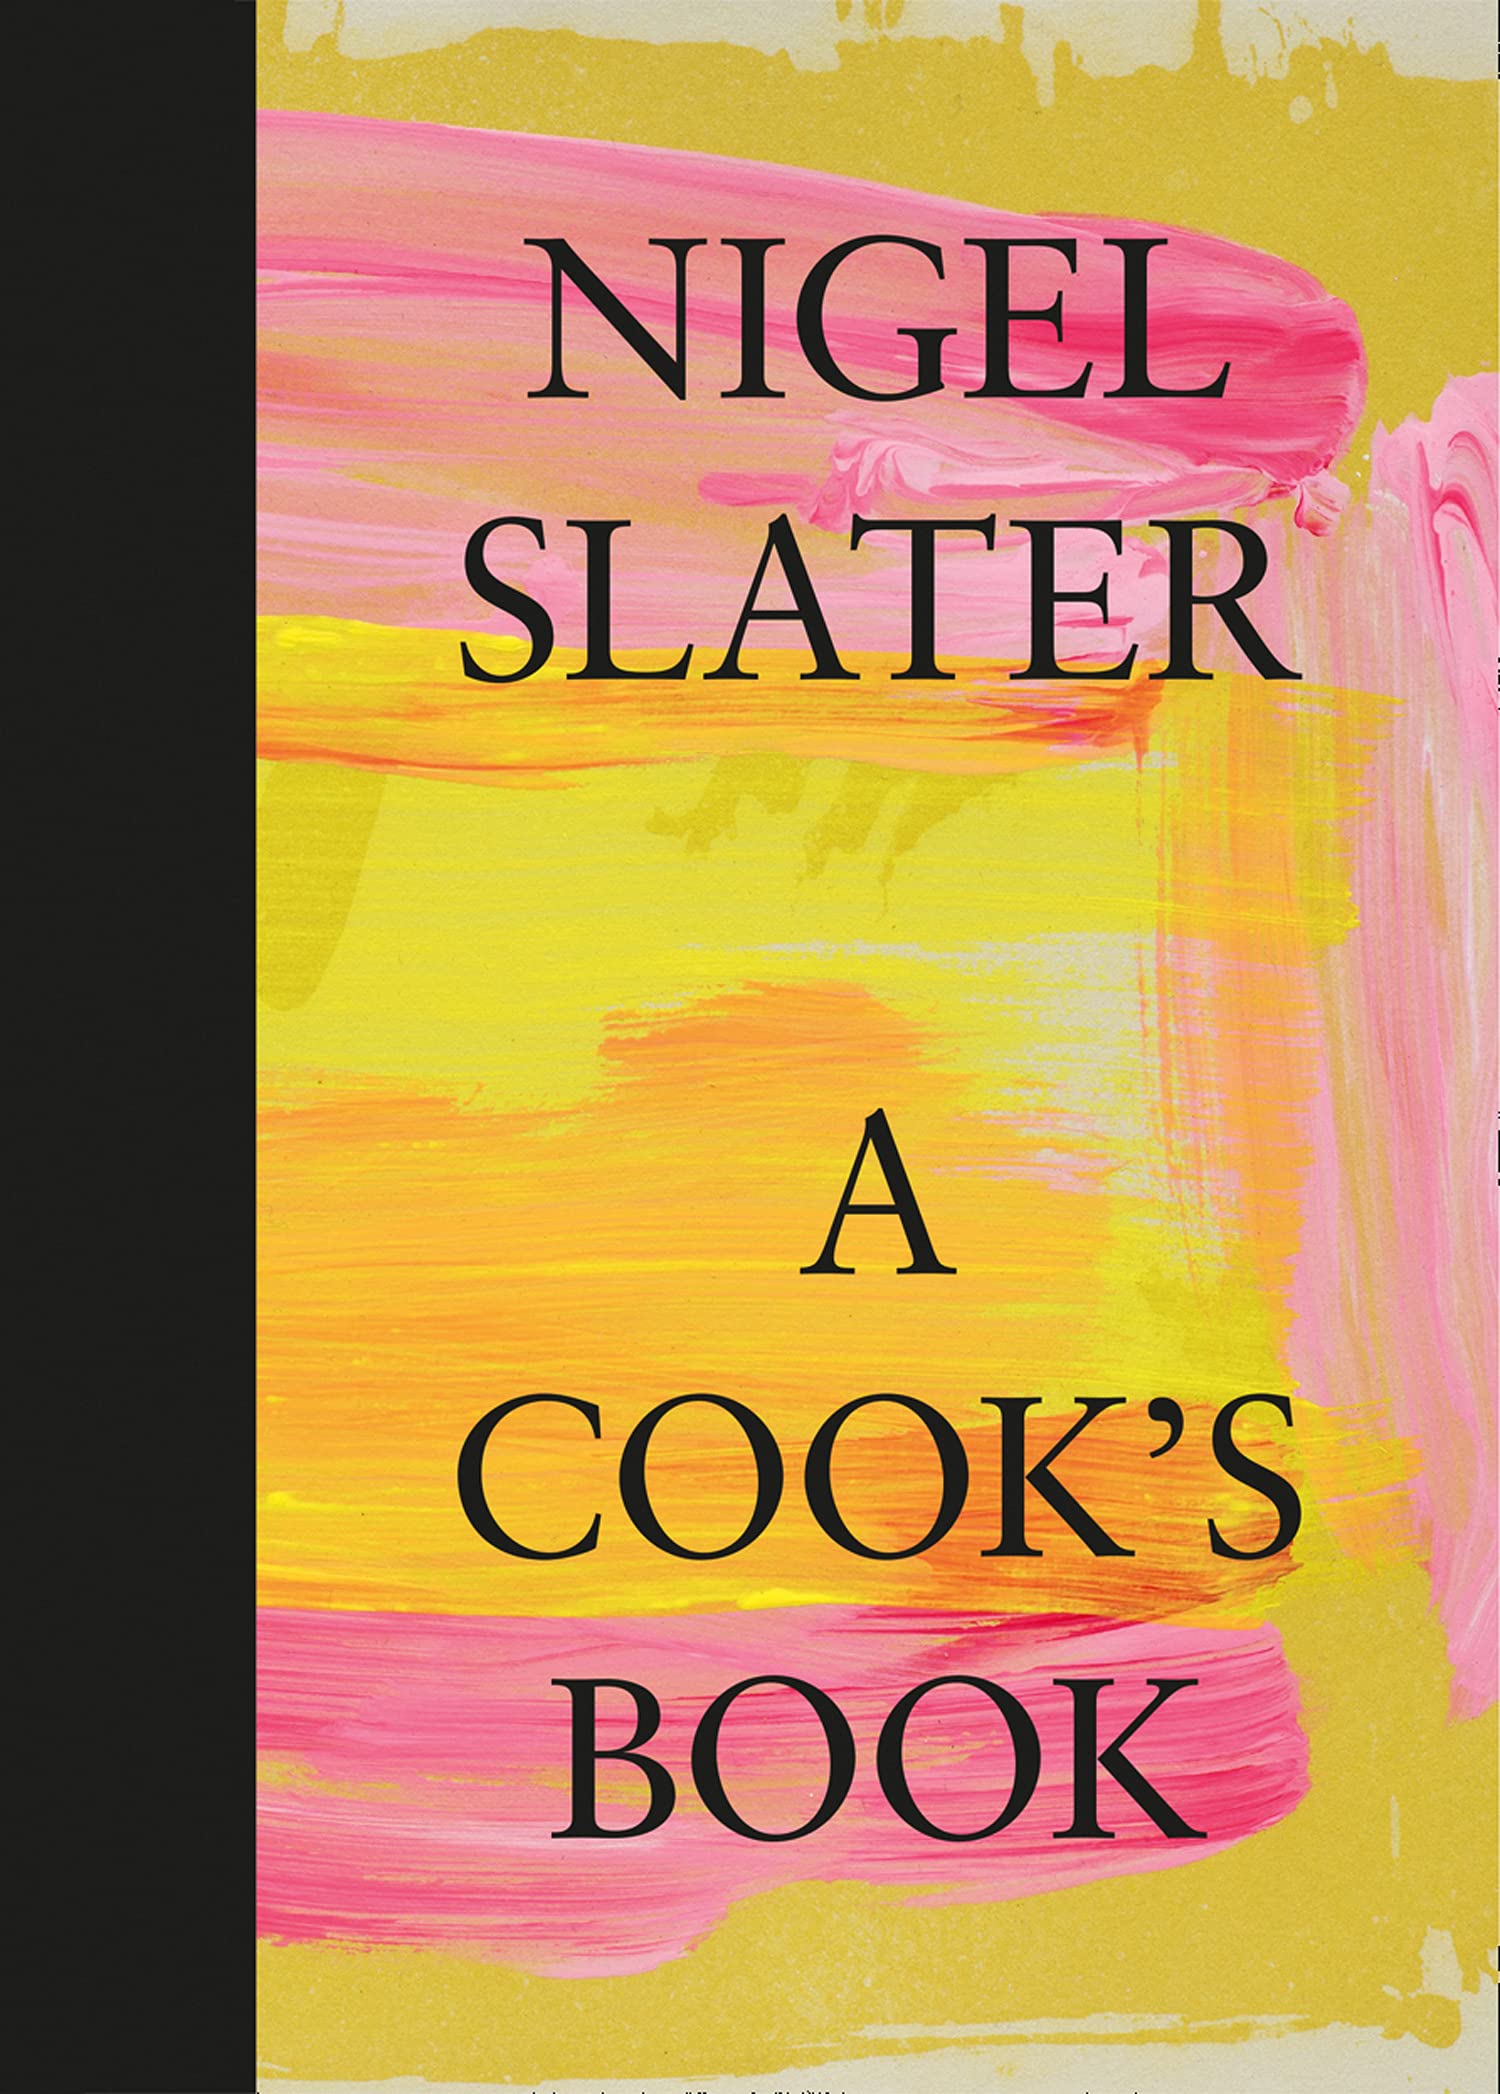 A Cook’s Book: The Essential Nigel Slater with over 200 recipes, US edition (Nigel Slater)